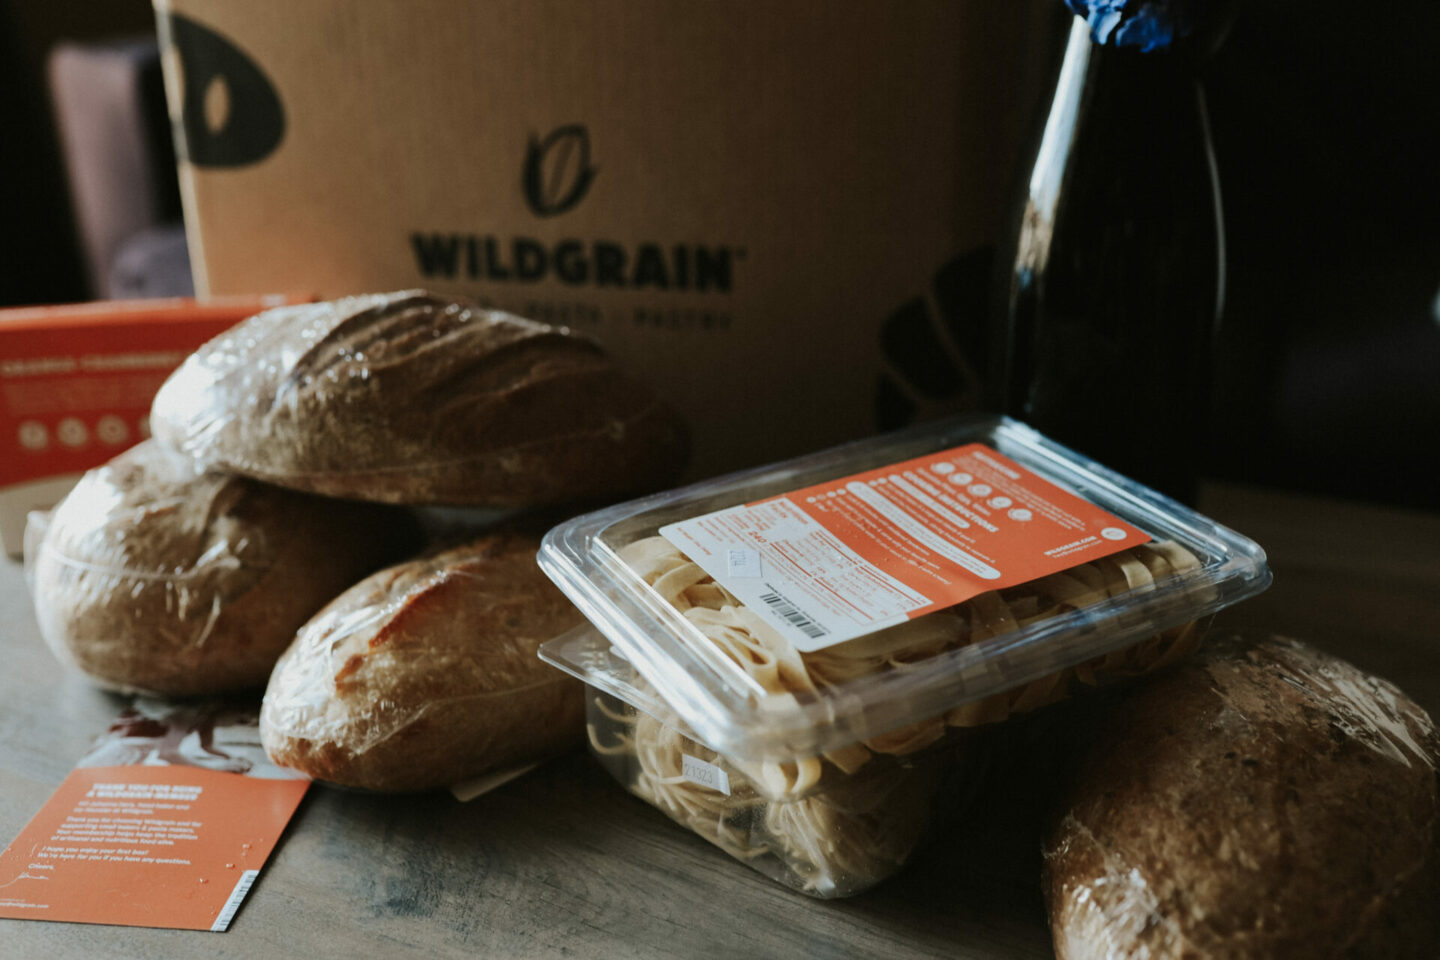 Wildgrain Box Review: The Best Bread Subscription for Winelovers